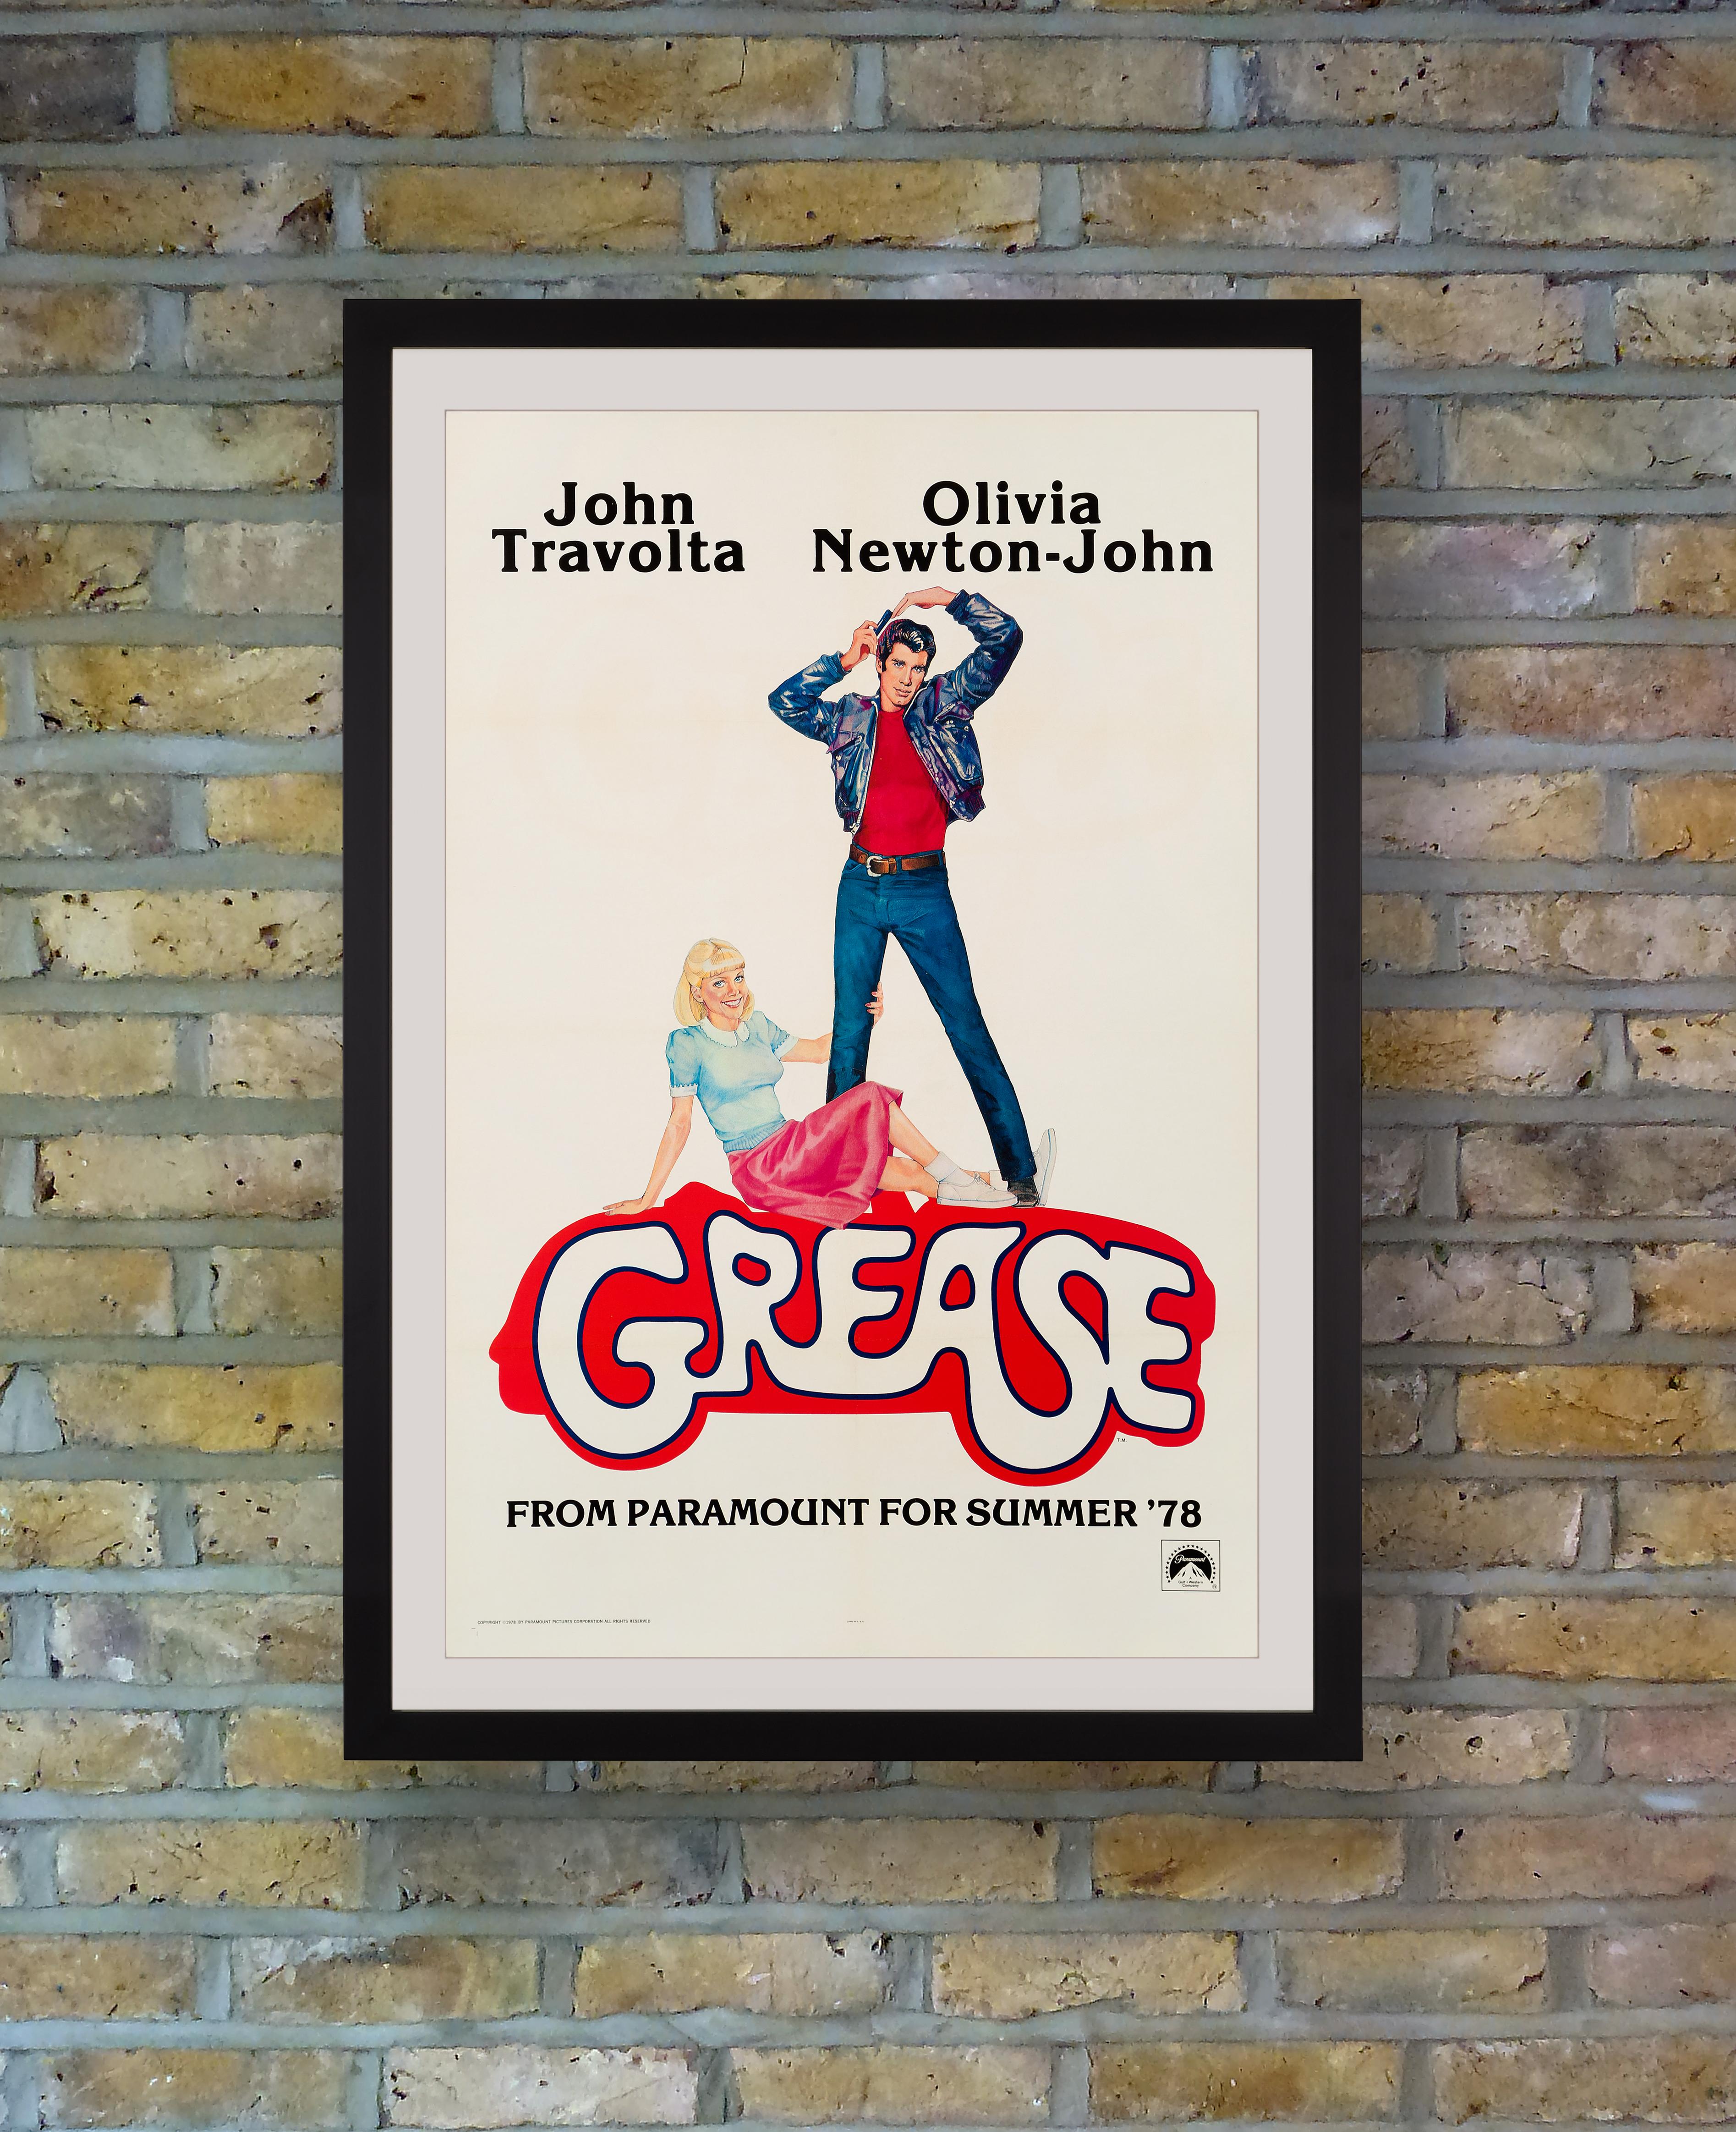 This rare US One Sheet poster with a delightfully peppy design by Linda Fennimore was released for the teaser Campaign ahead of the summer 1978 release of Paramount's blockbuster musical romance 'Grease.' Based on the Broadway musical of the same